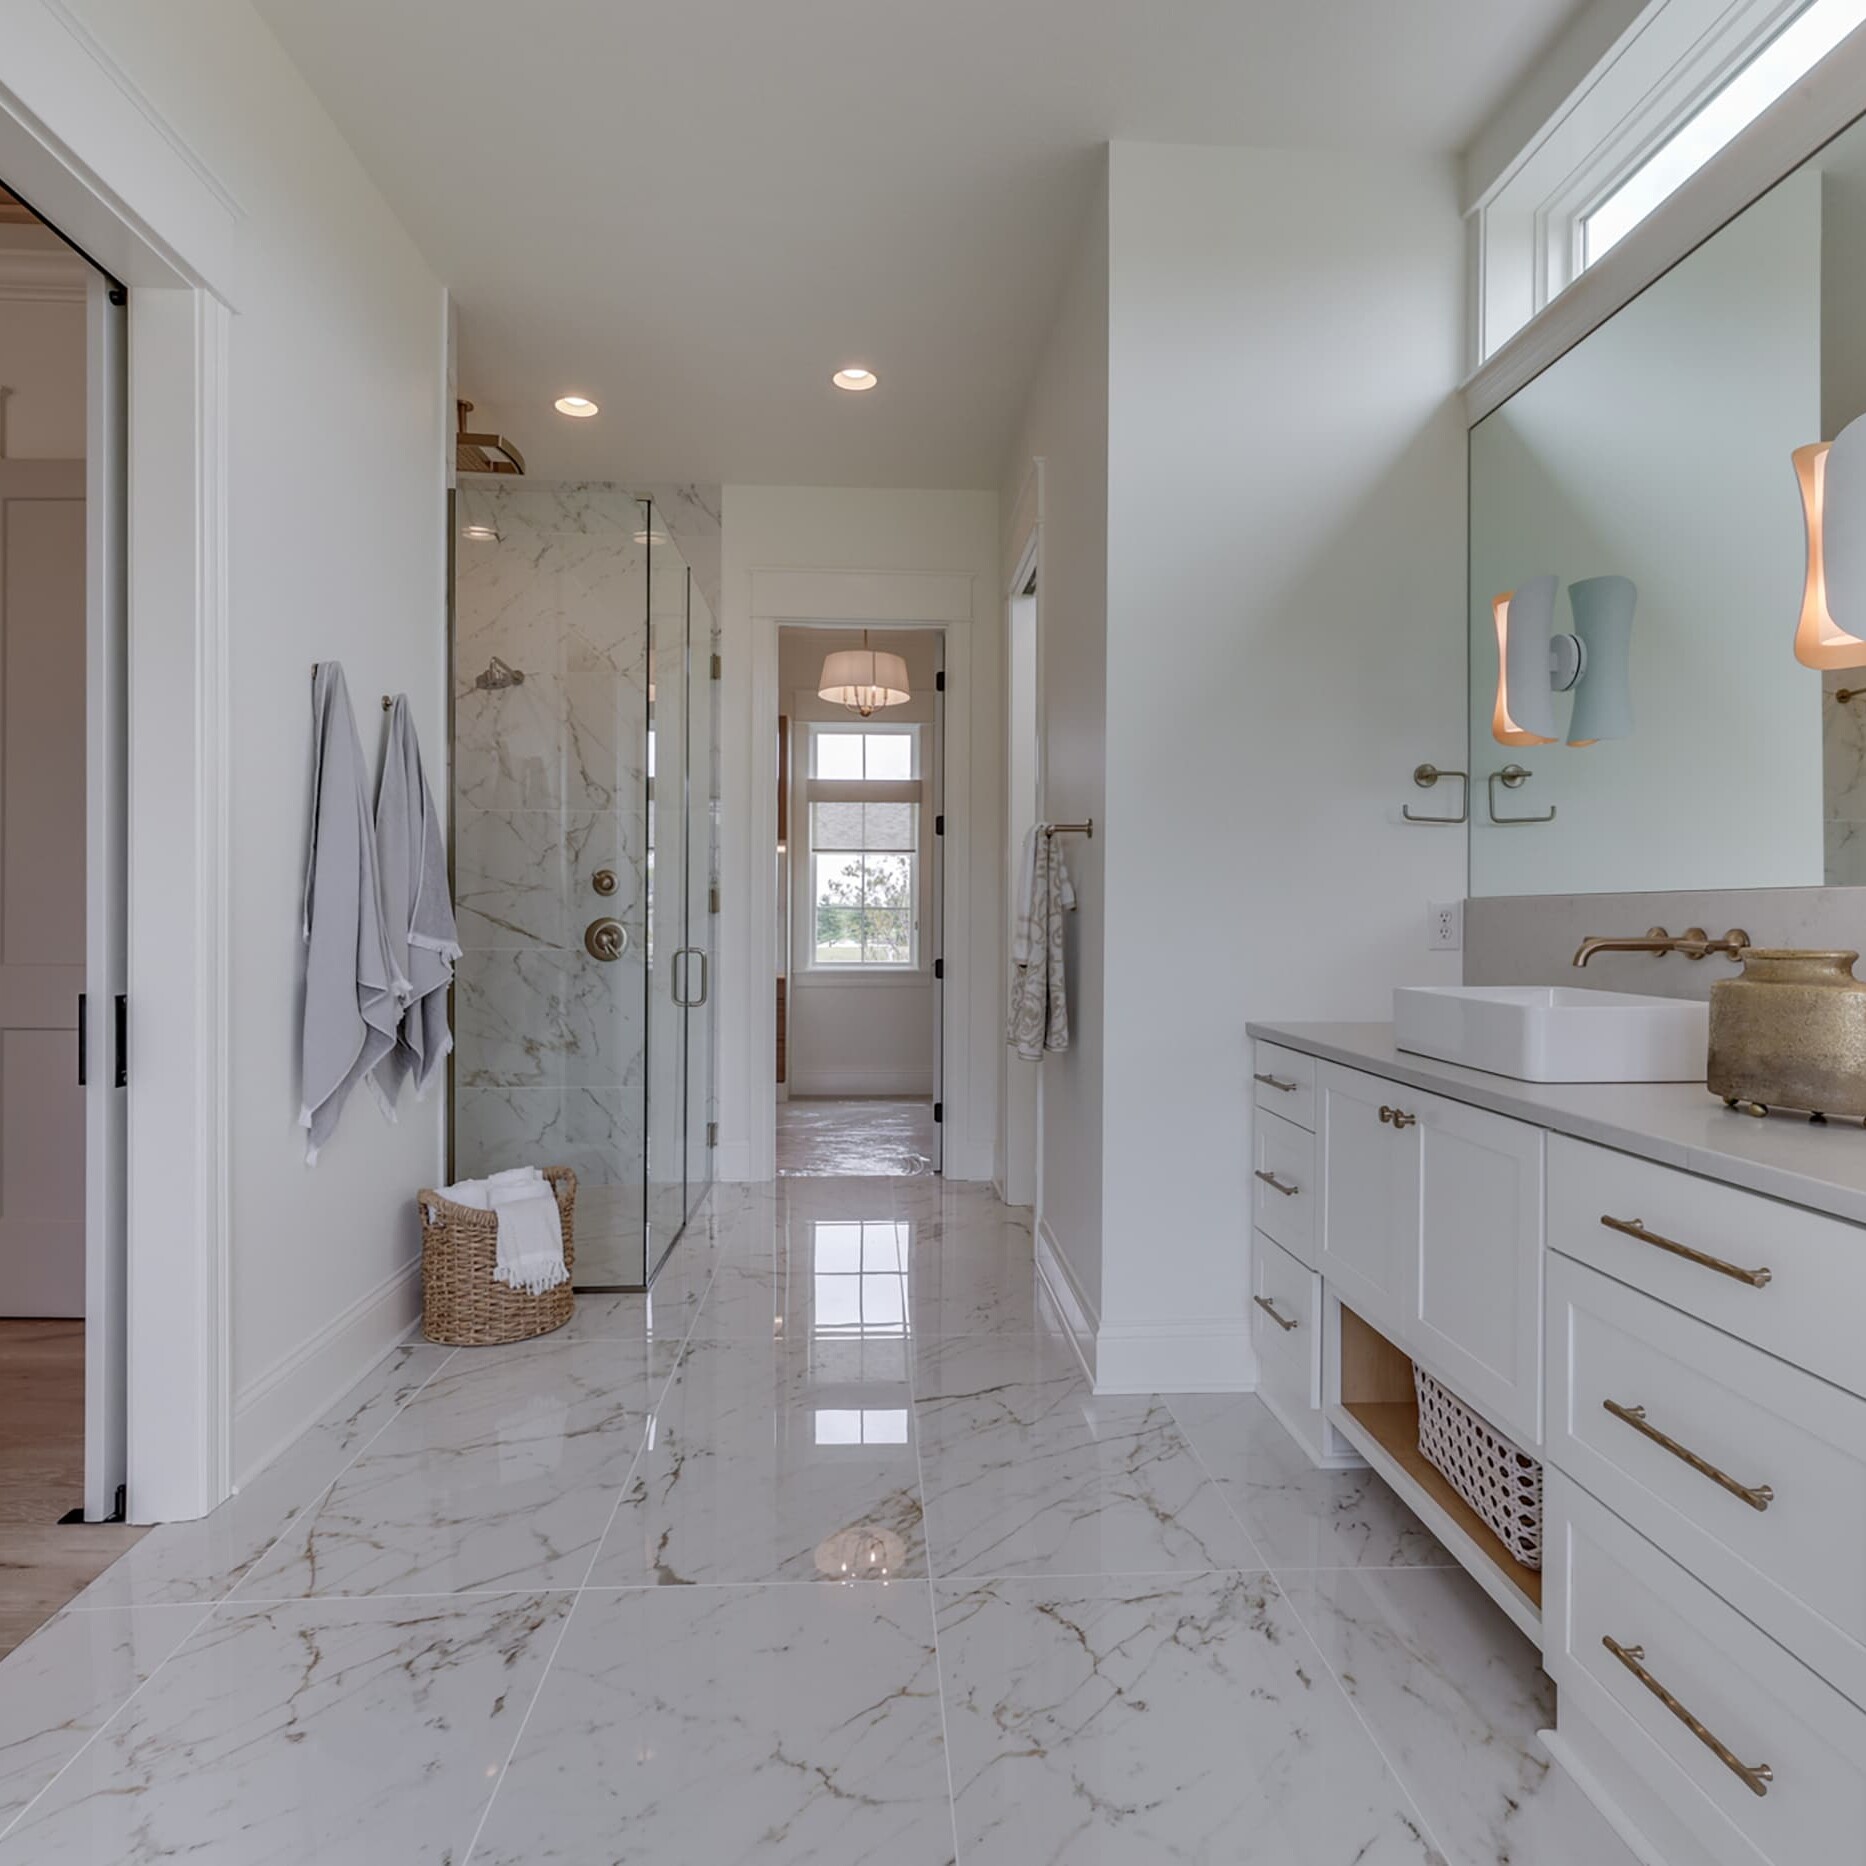 A white bathroom with marble counter tops and a glass shower.